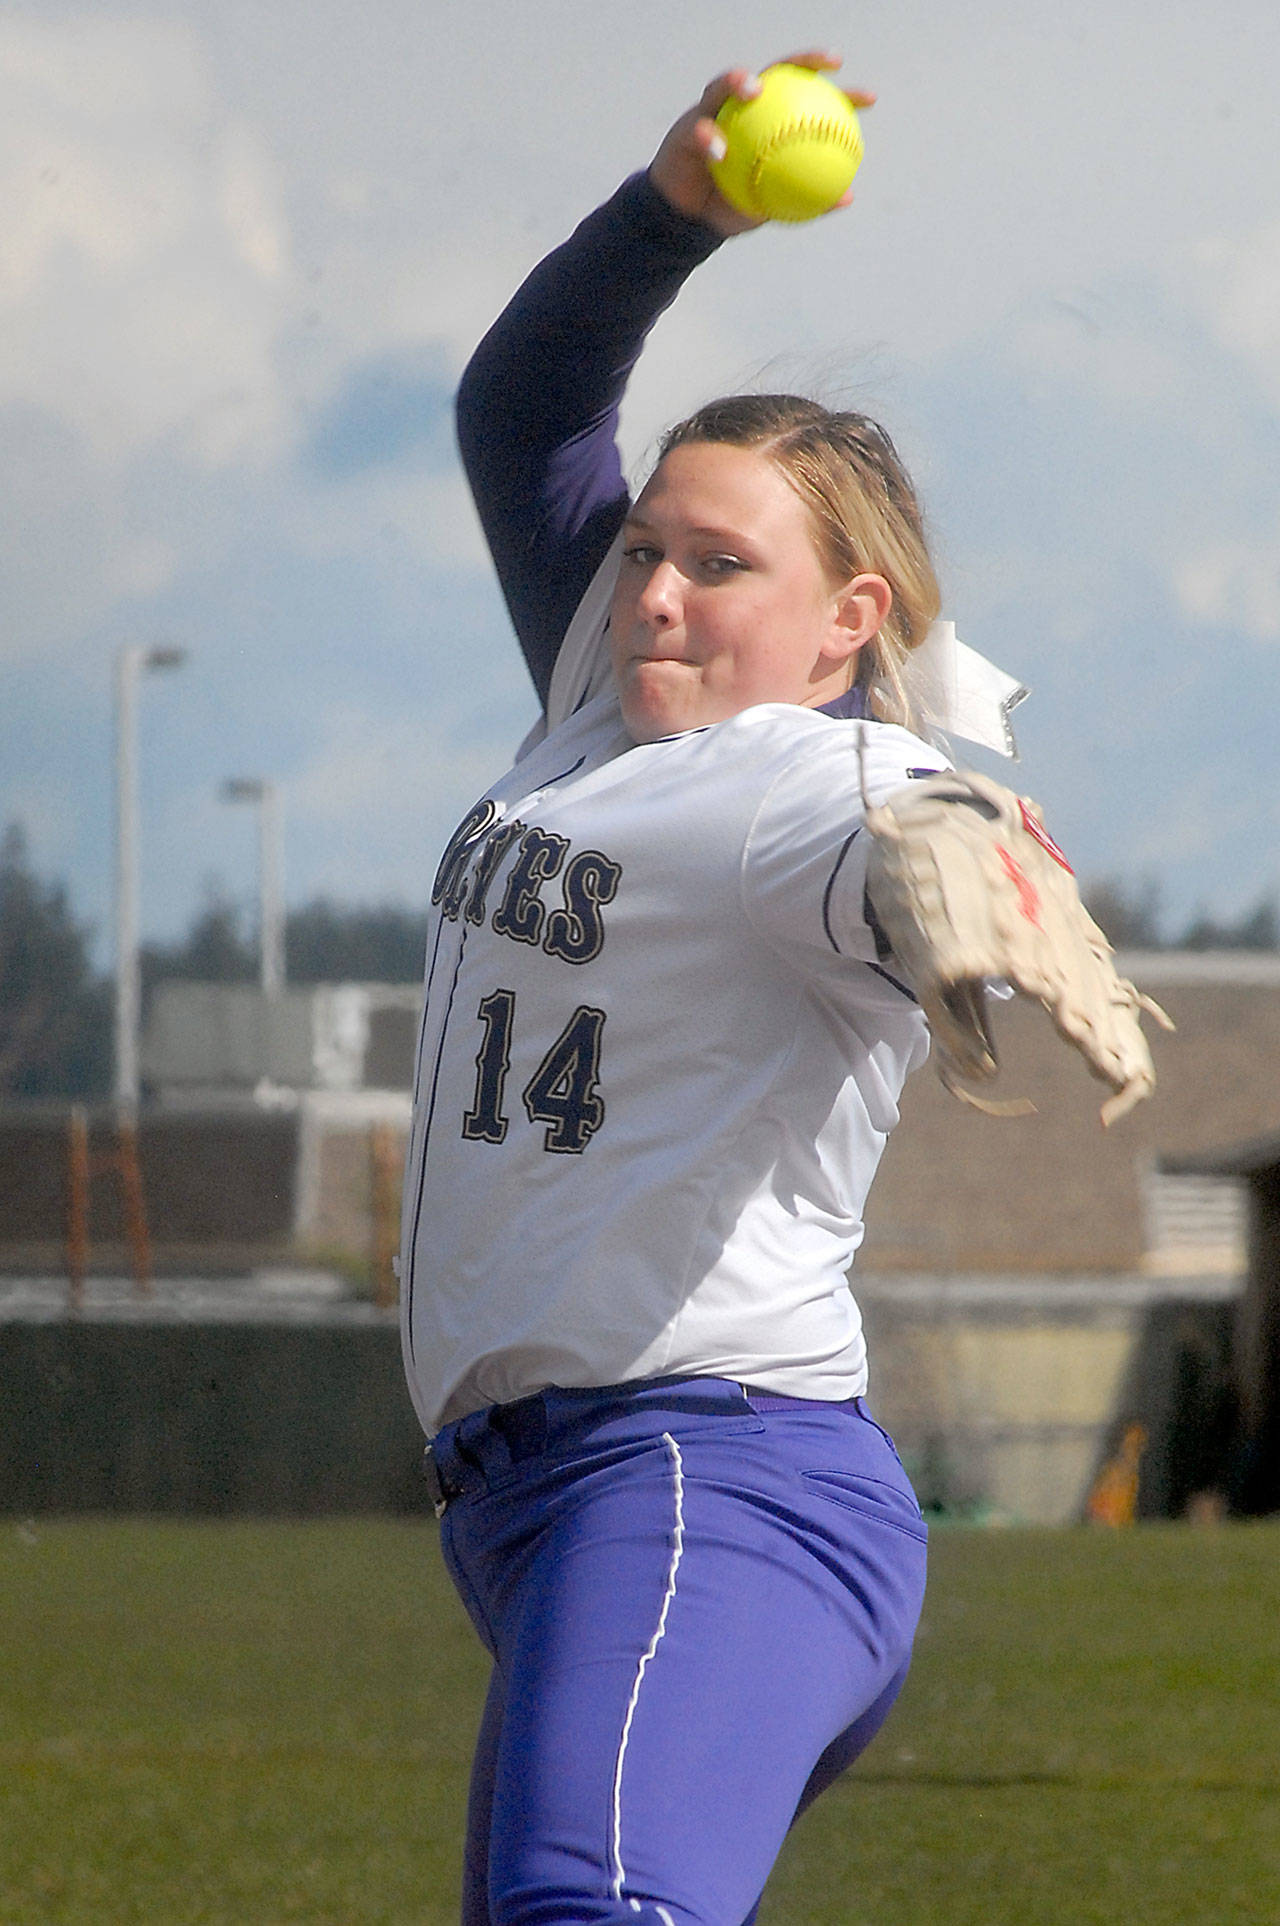 Keith Thorpe/Peninsula Daily News Sequim’s Shelby Jones pitches during Saturday’s game against Archbishop Murphy at Sequim High School.